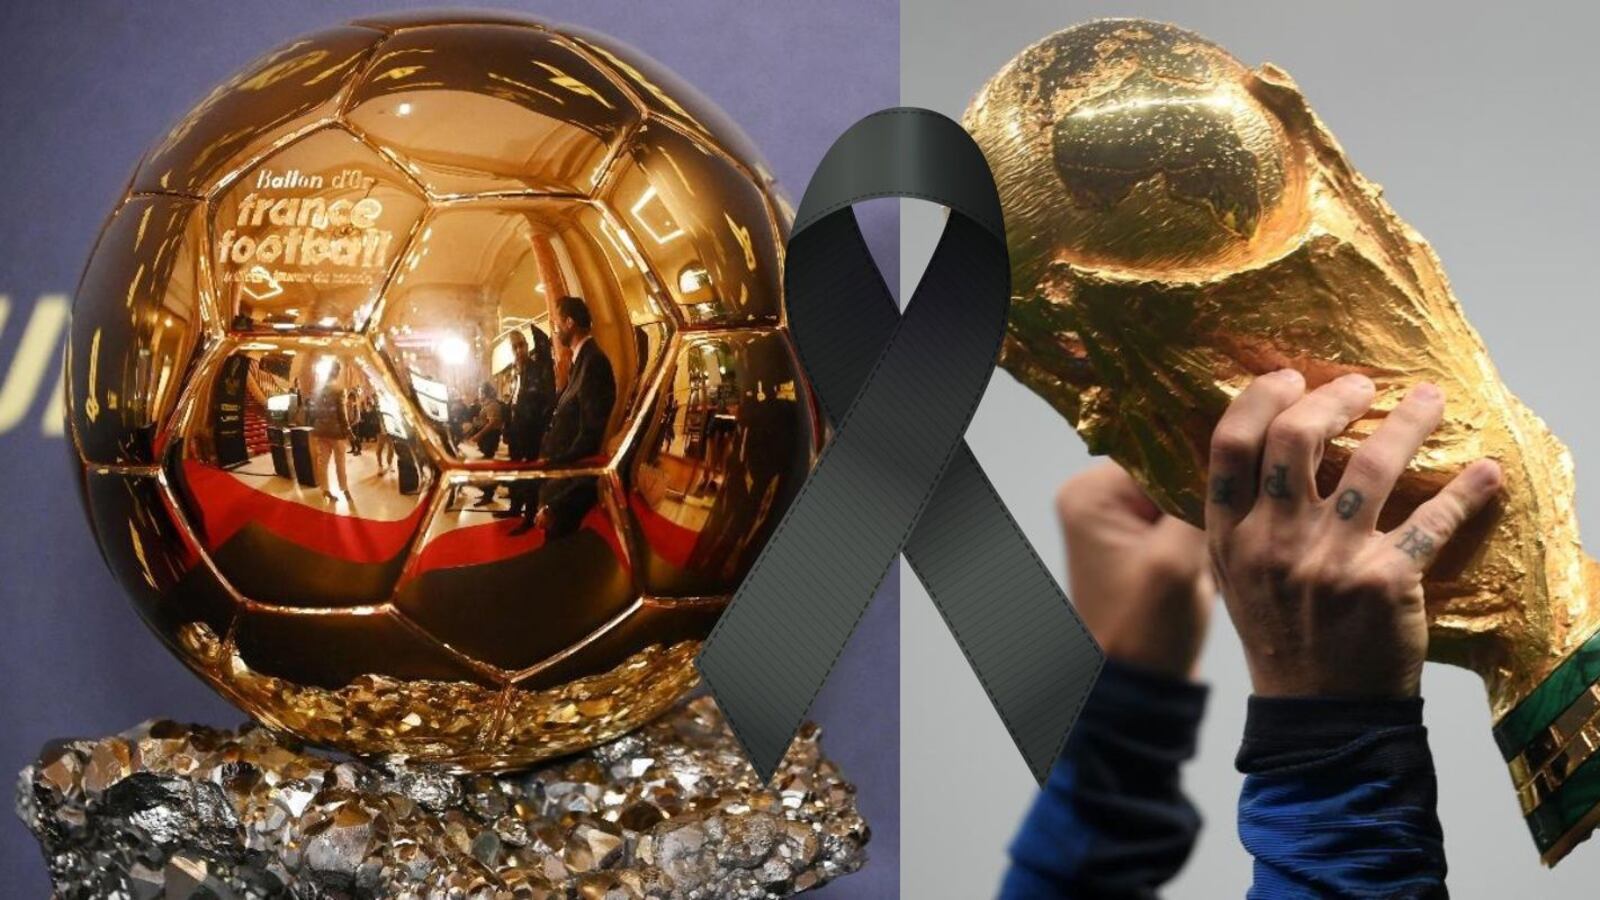 He won a Ballon d'Or, is a world champion and now he loses his life